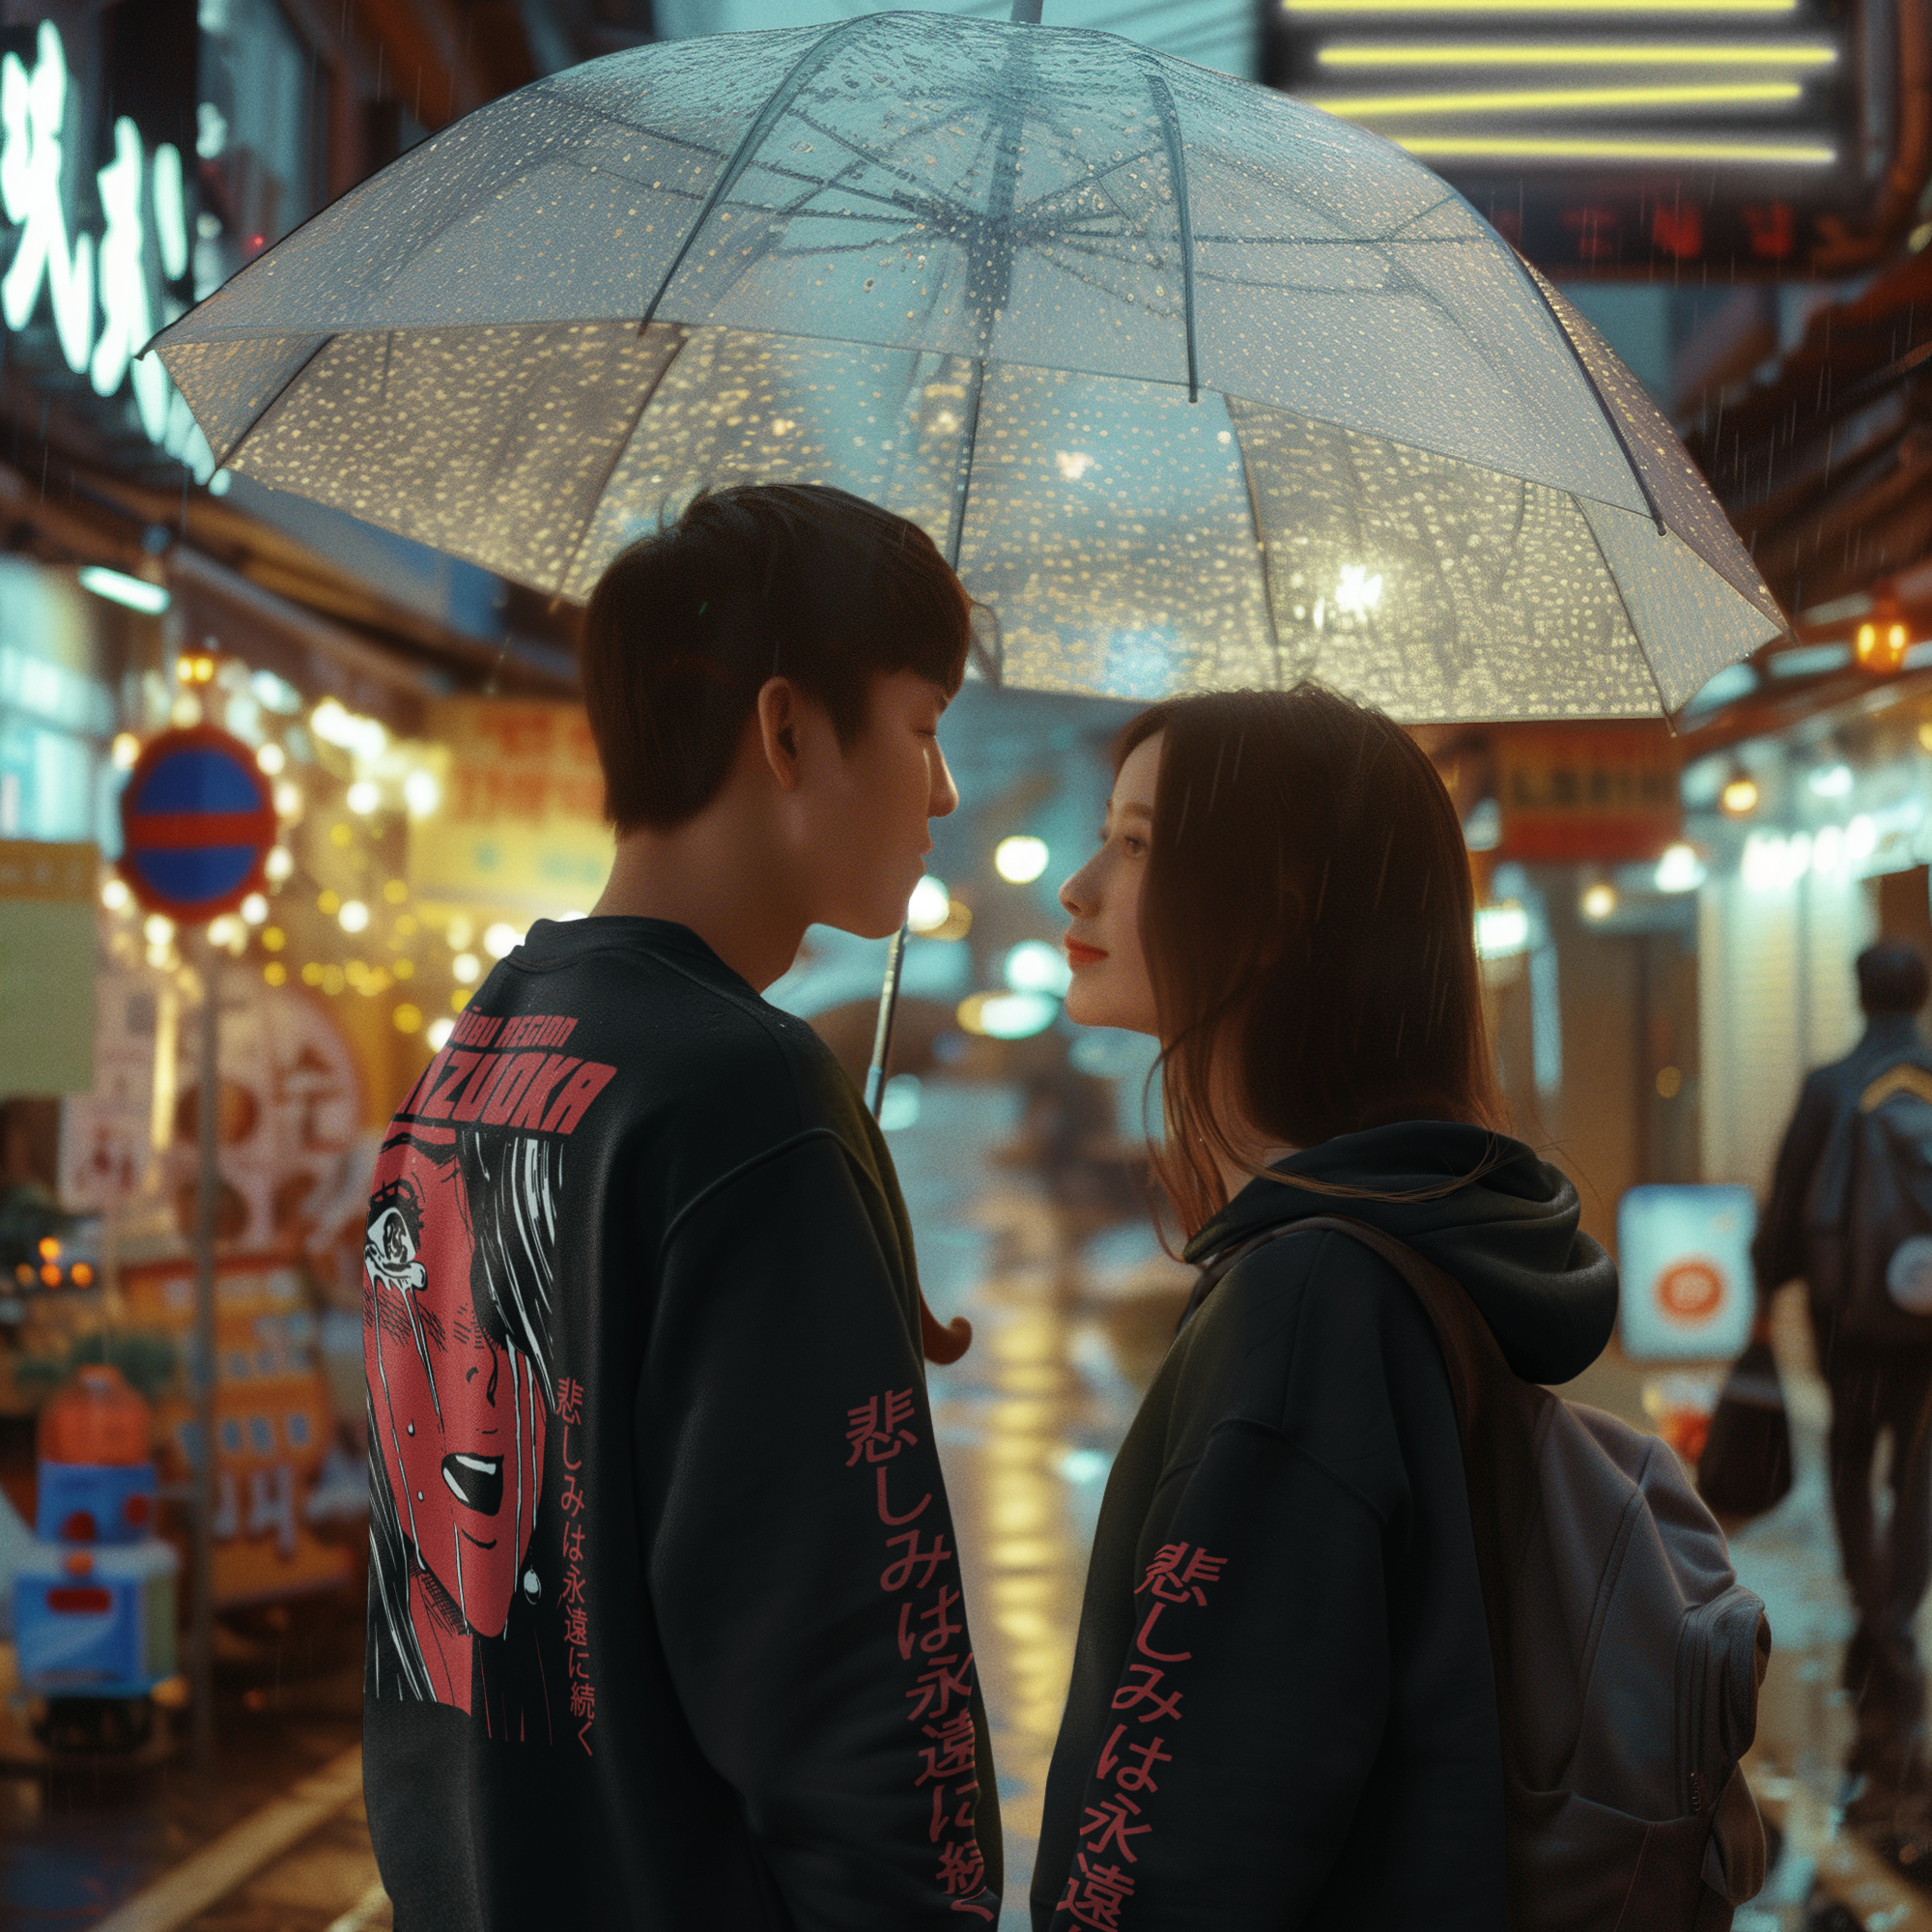 hoodie-and-sweatshirt-mockup-of-an-ai-created-man-and-woman-standing-under-the-rain-inspired-by-a-k-drama-m38339.png